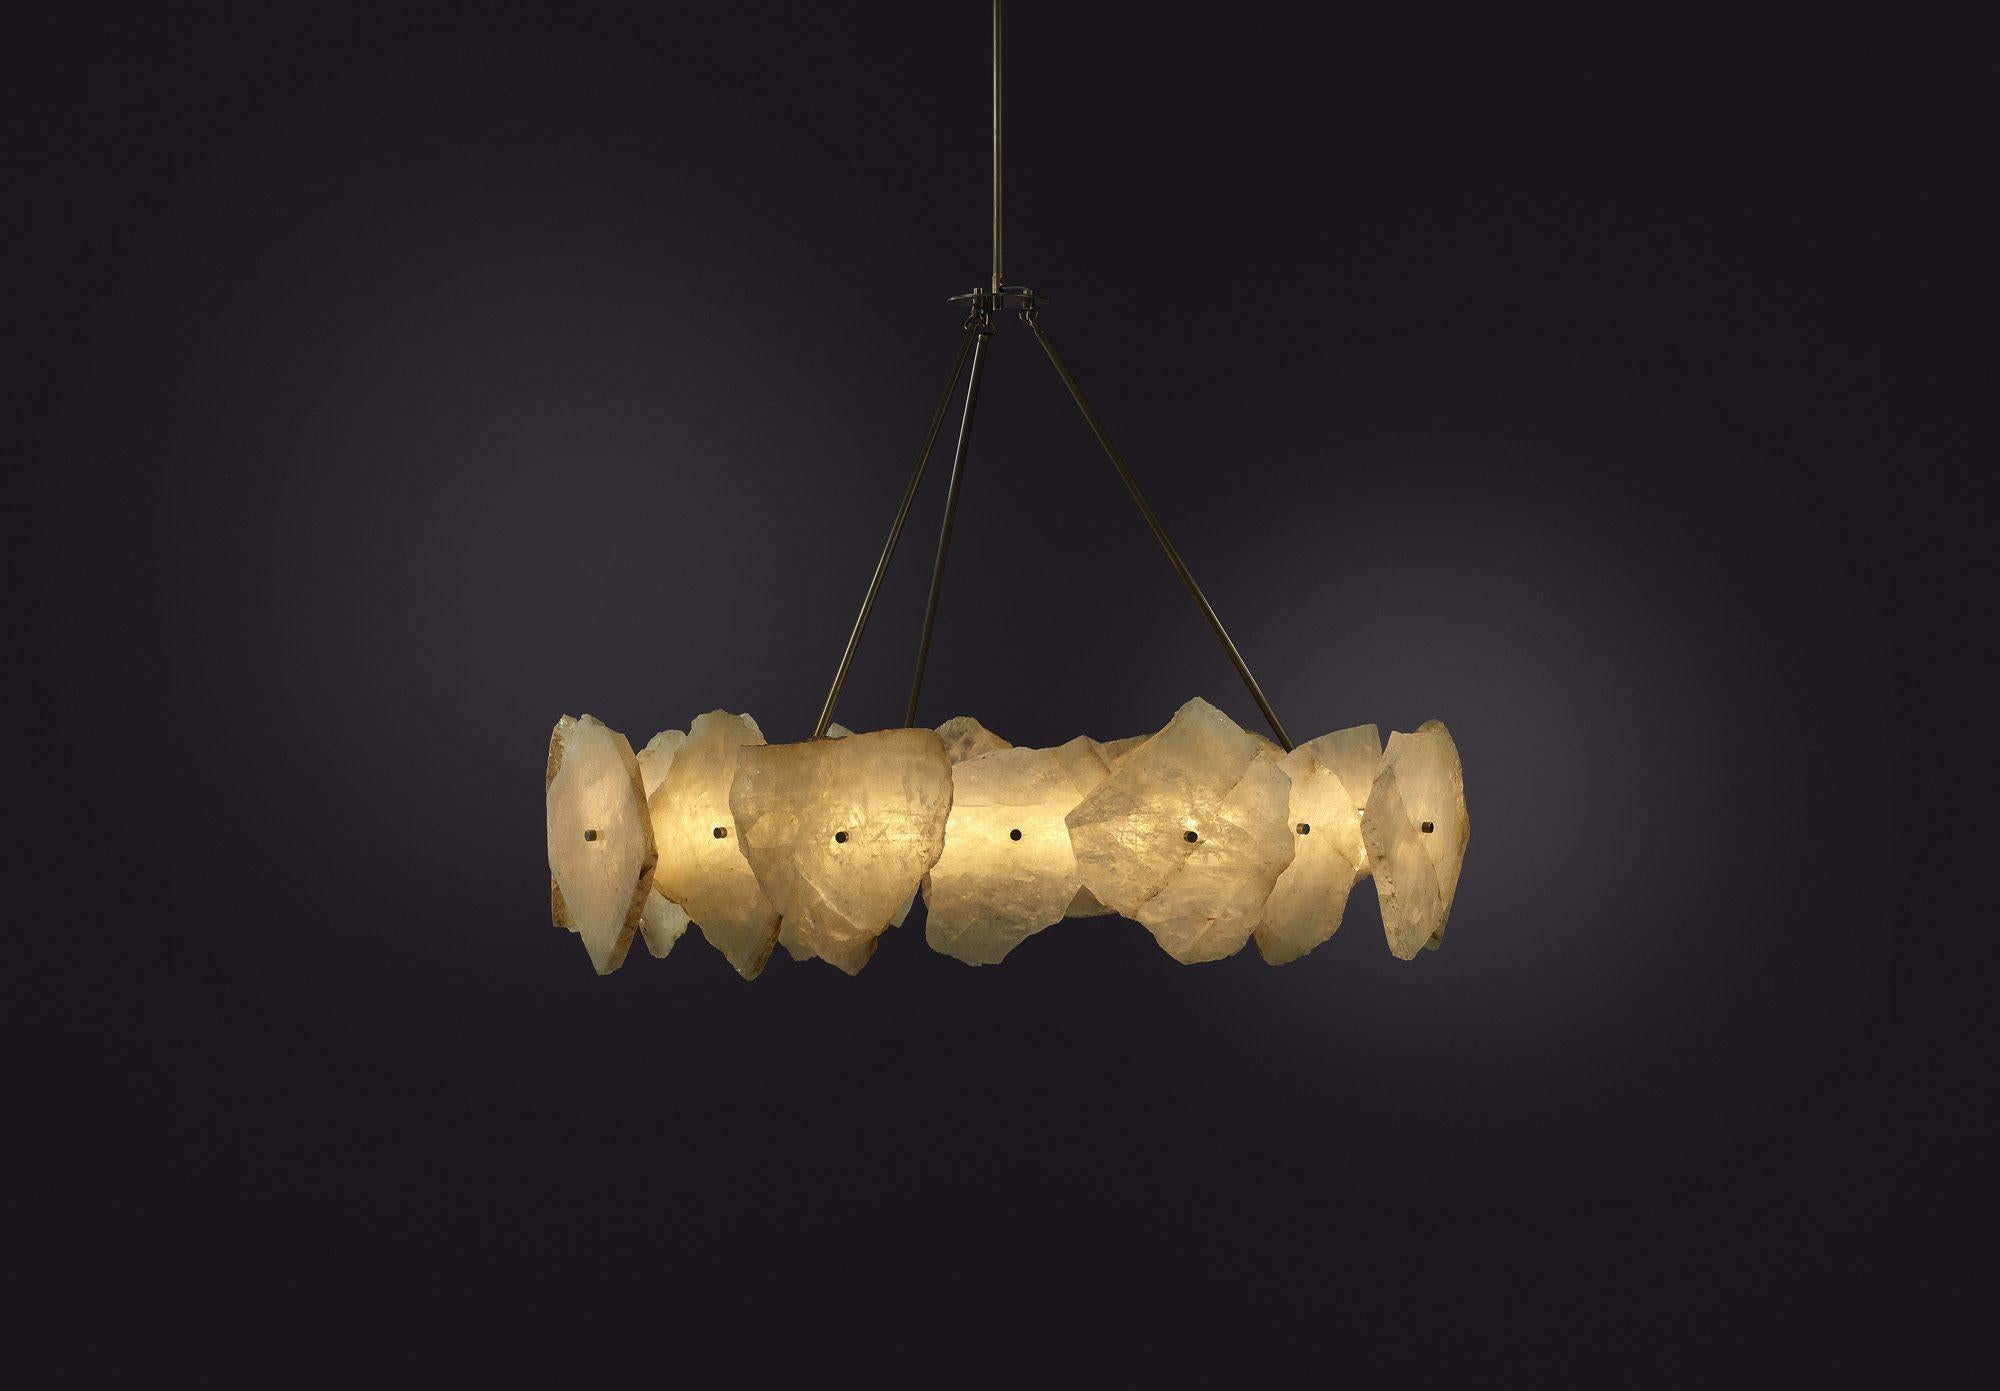 Contemporary Chandelier in Quartz Slices and Brass - Petra III Circular 1100 by Christopher Boots

PETRA (from the Greek ??t?a, meaning stone) celebrates the subtleties and complexities of quartz. Quartz was highly revered by the ancients who